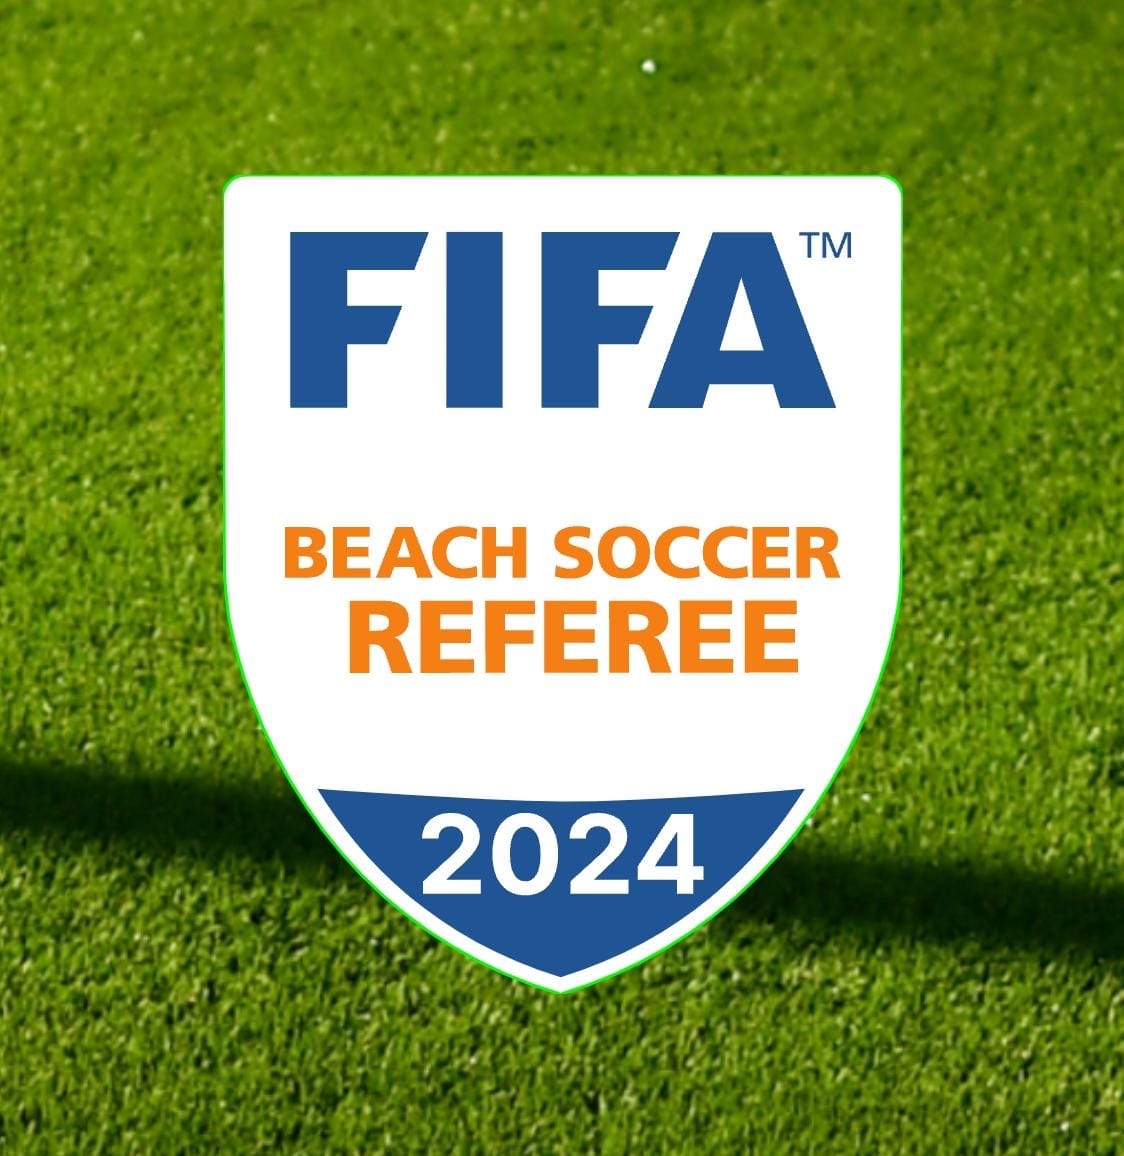 GFA excited to welcome its first FIFA Beach Soccer Referee